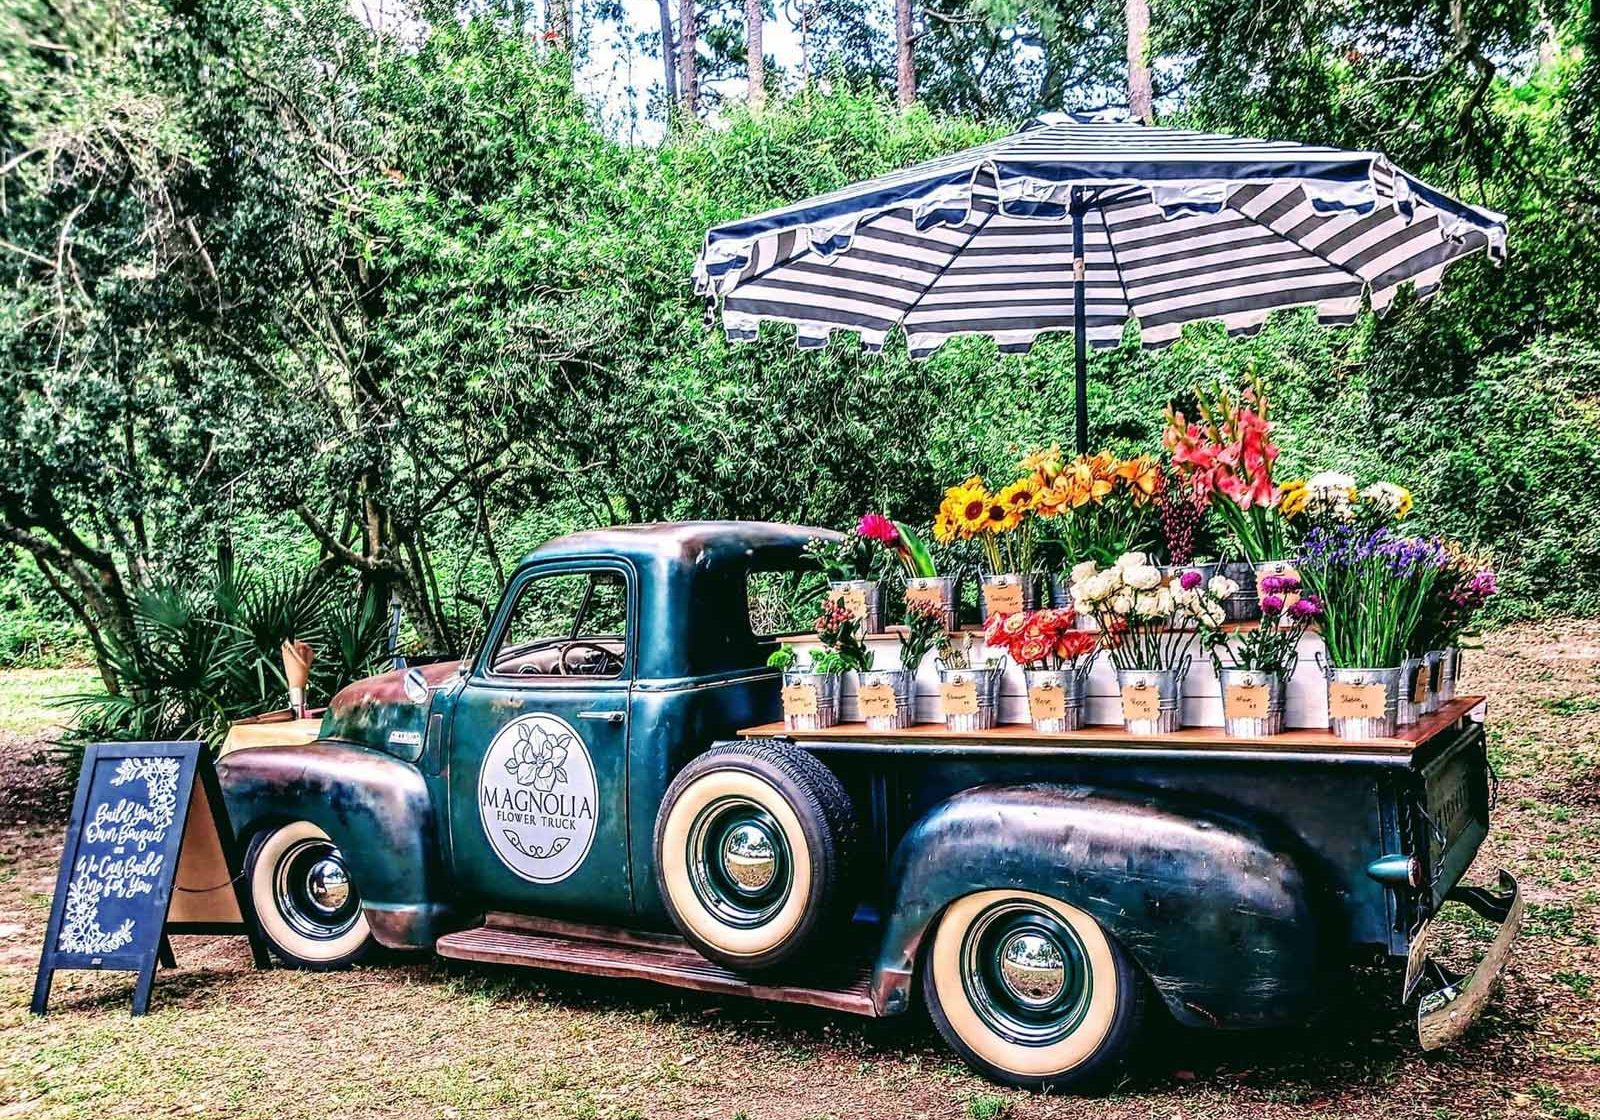 Magnolia Flower Truck Offers Subscription Service